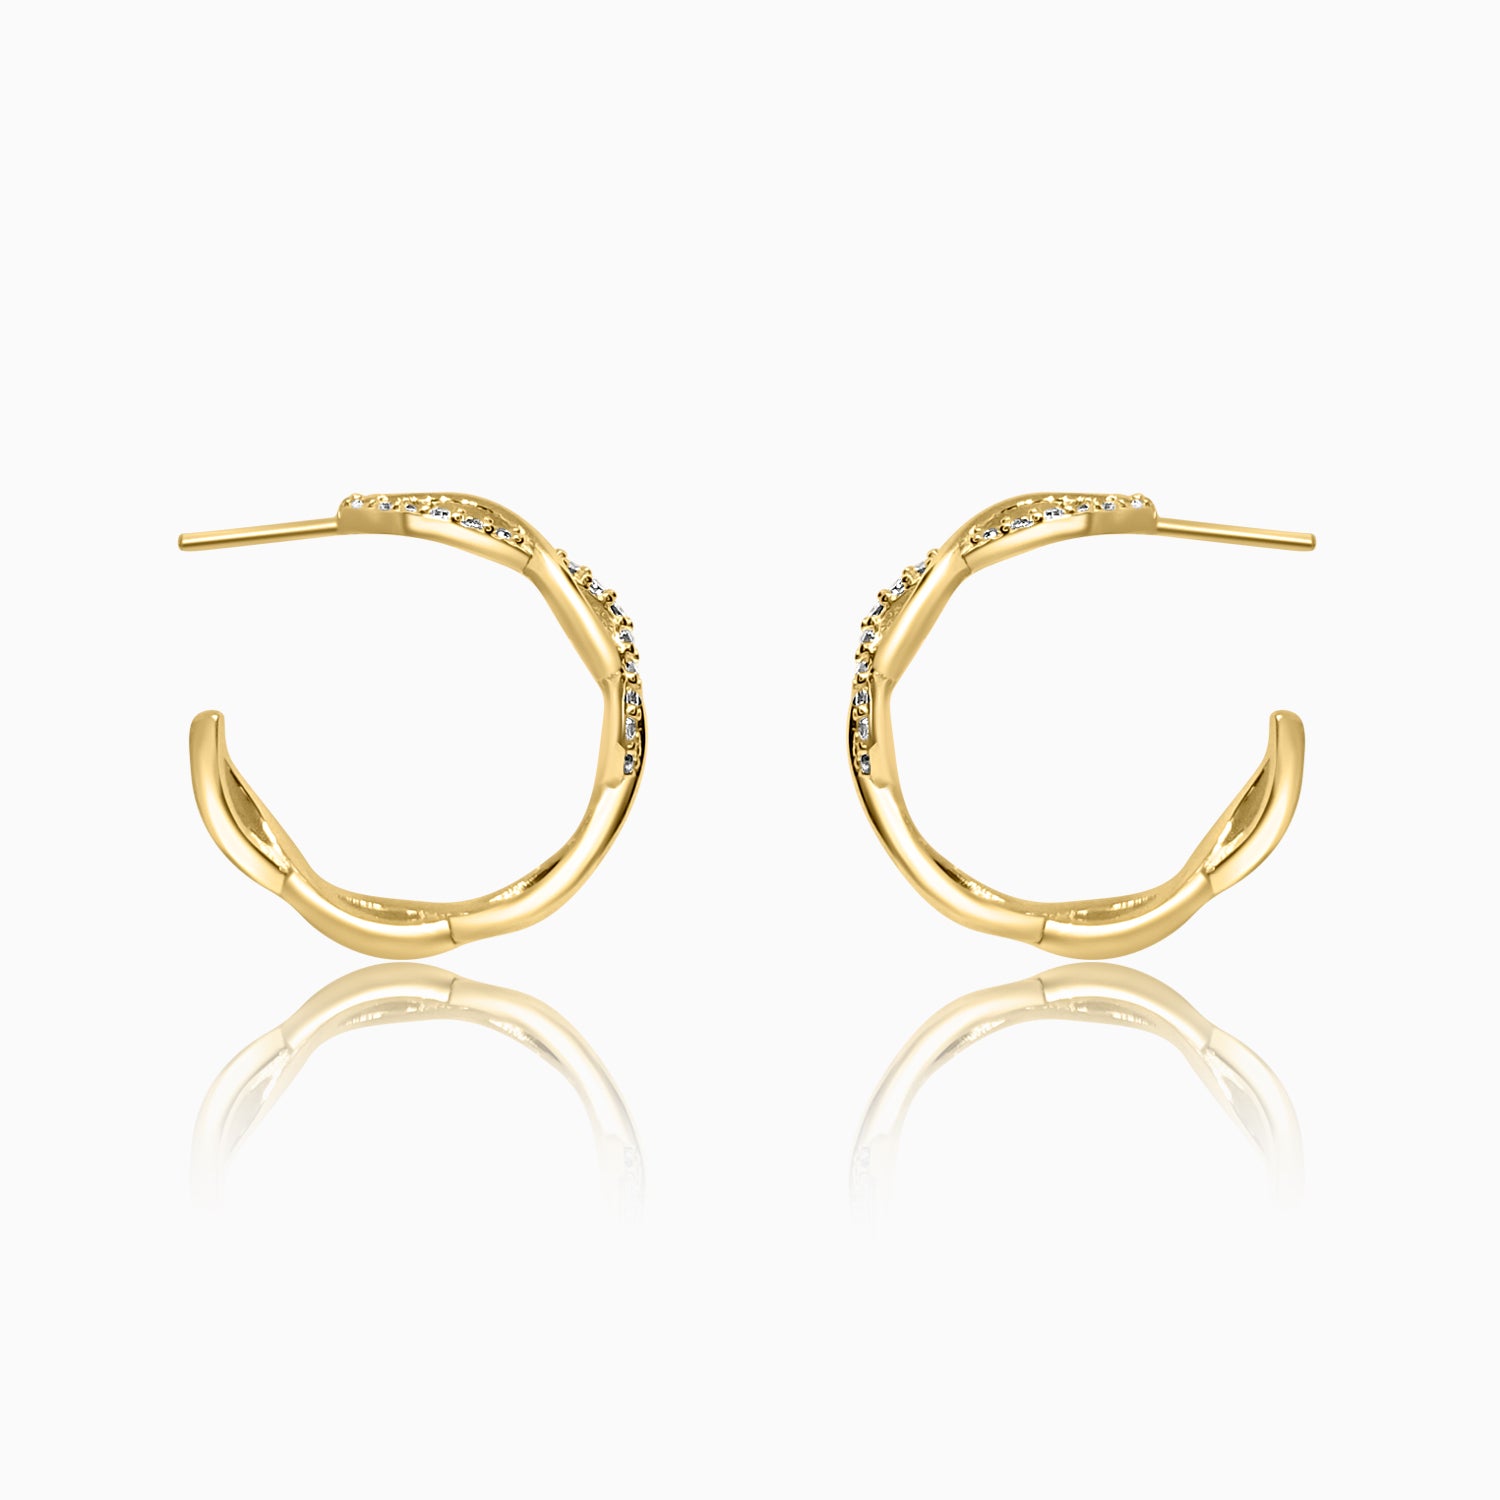 Silver Gold Sparkling Twisted Hoop Earrings